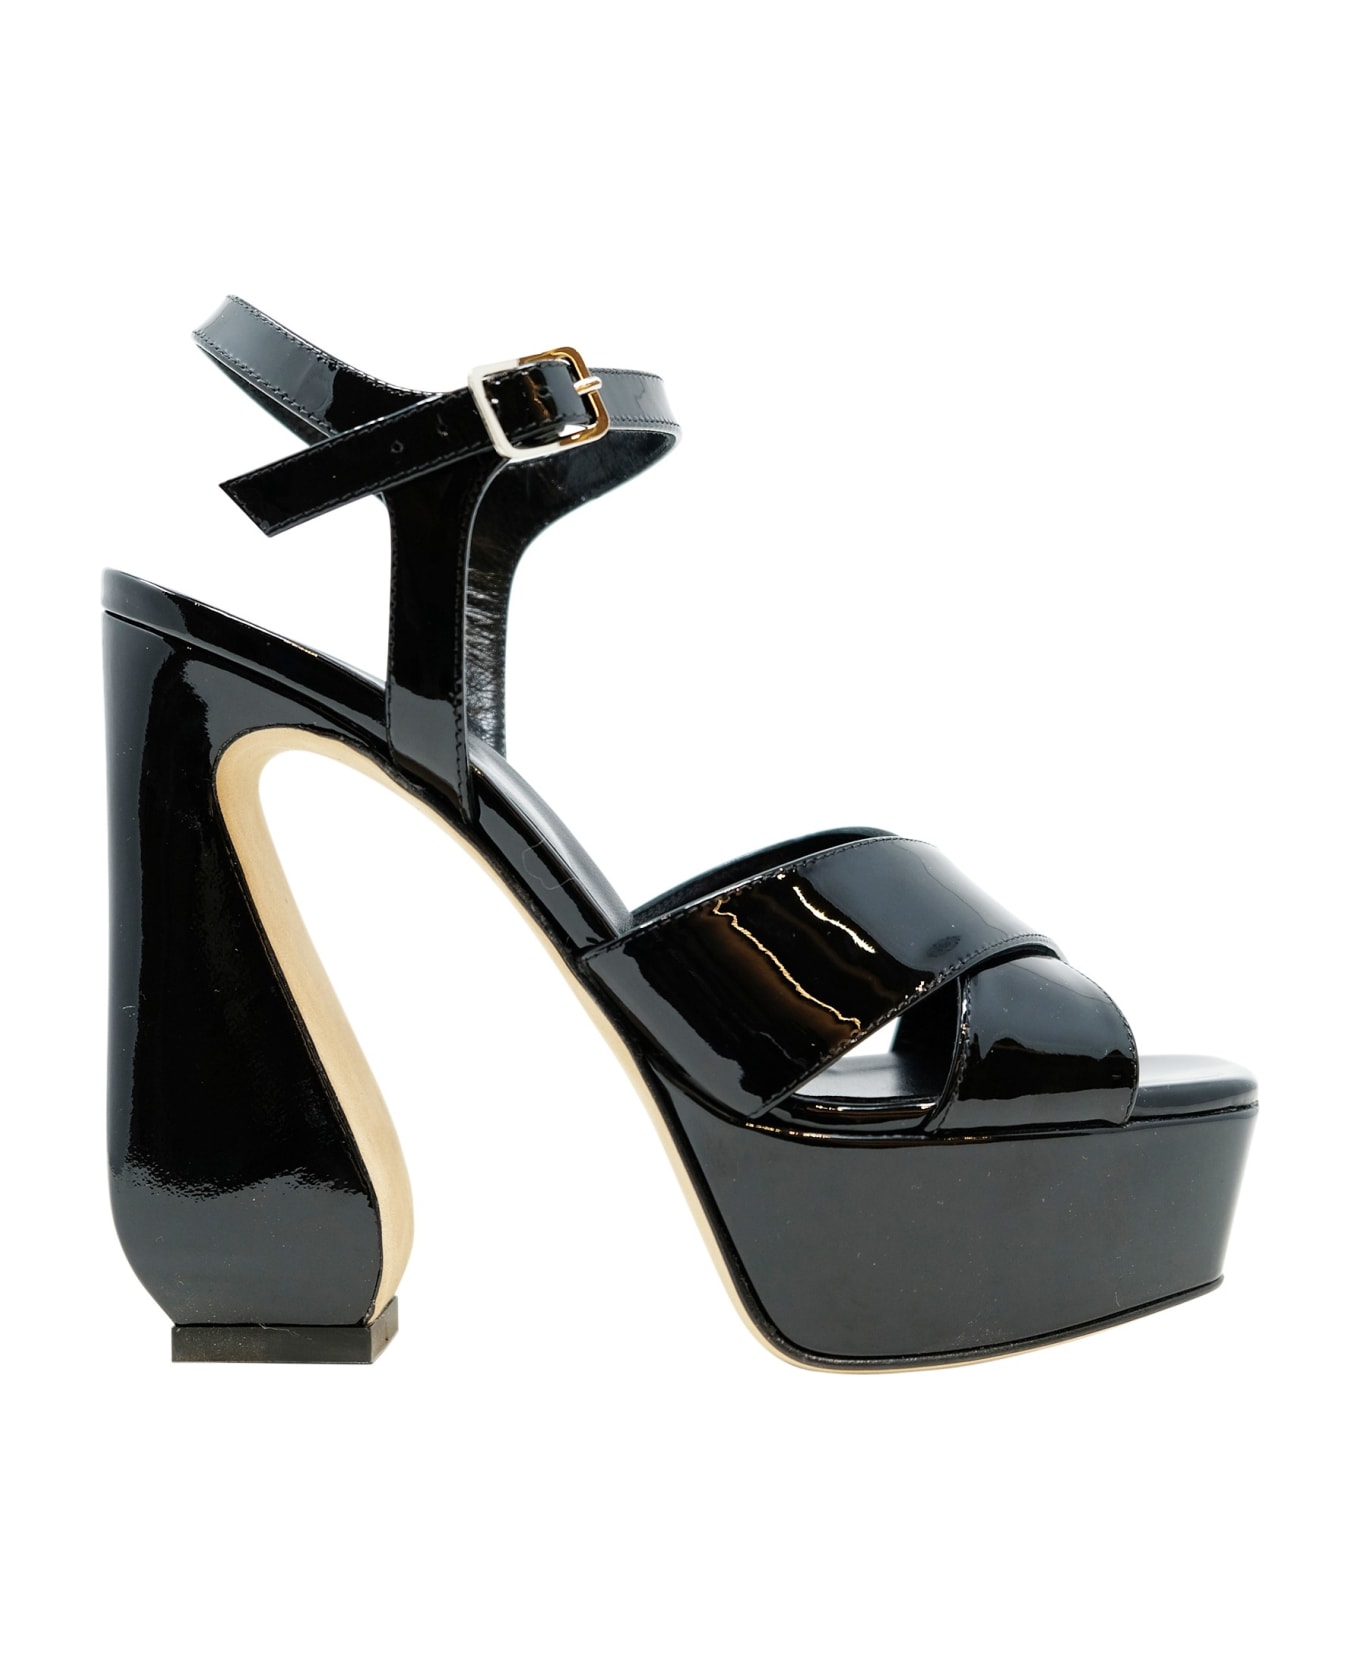 SI Rossi Black Patent Leather Sandals